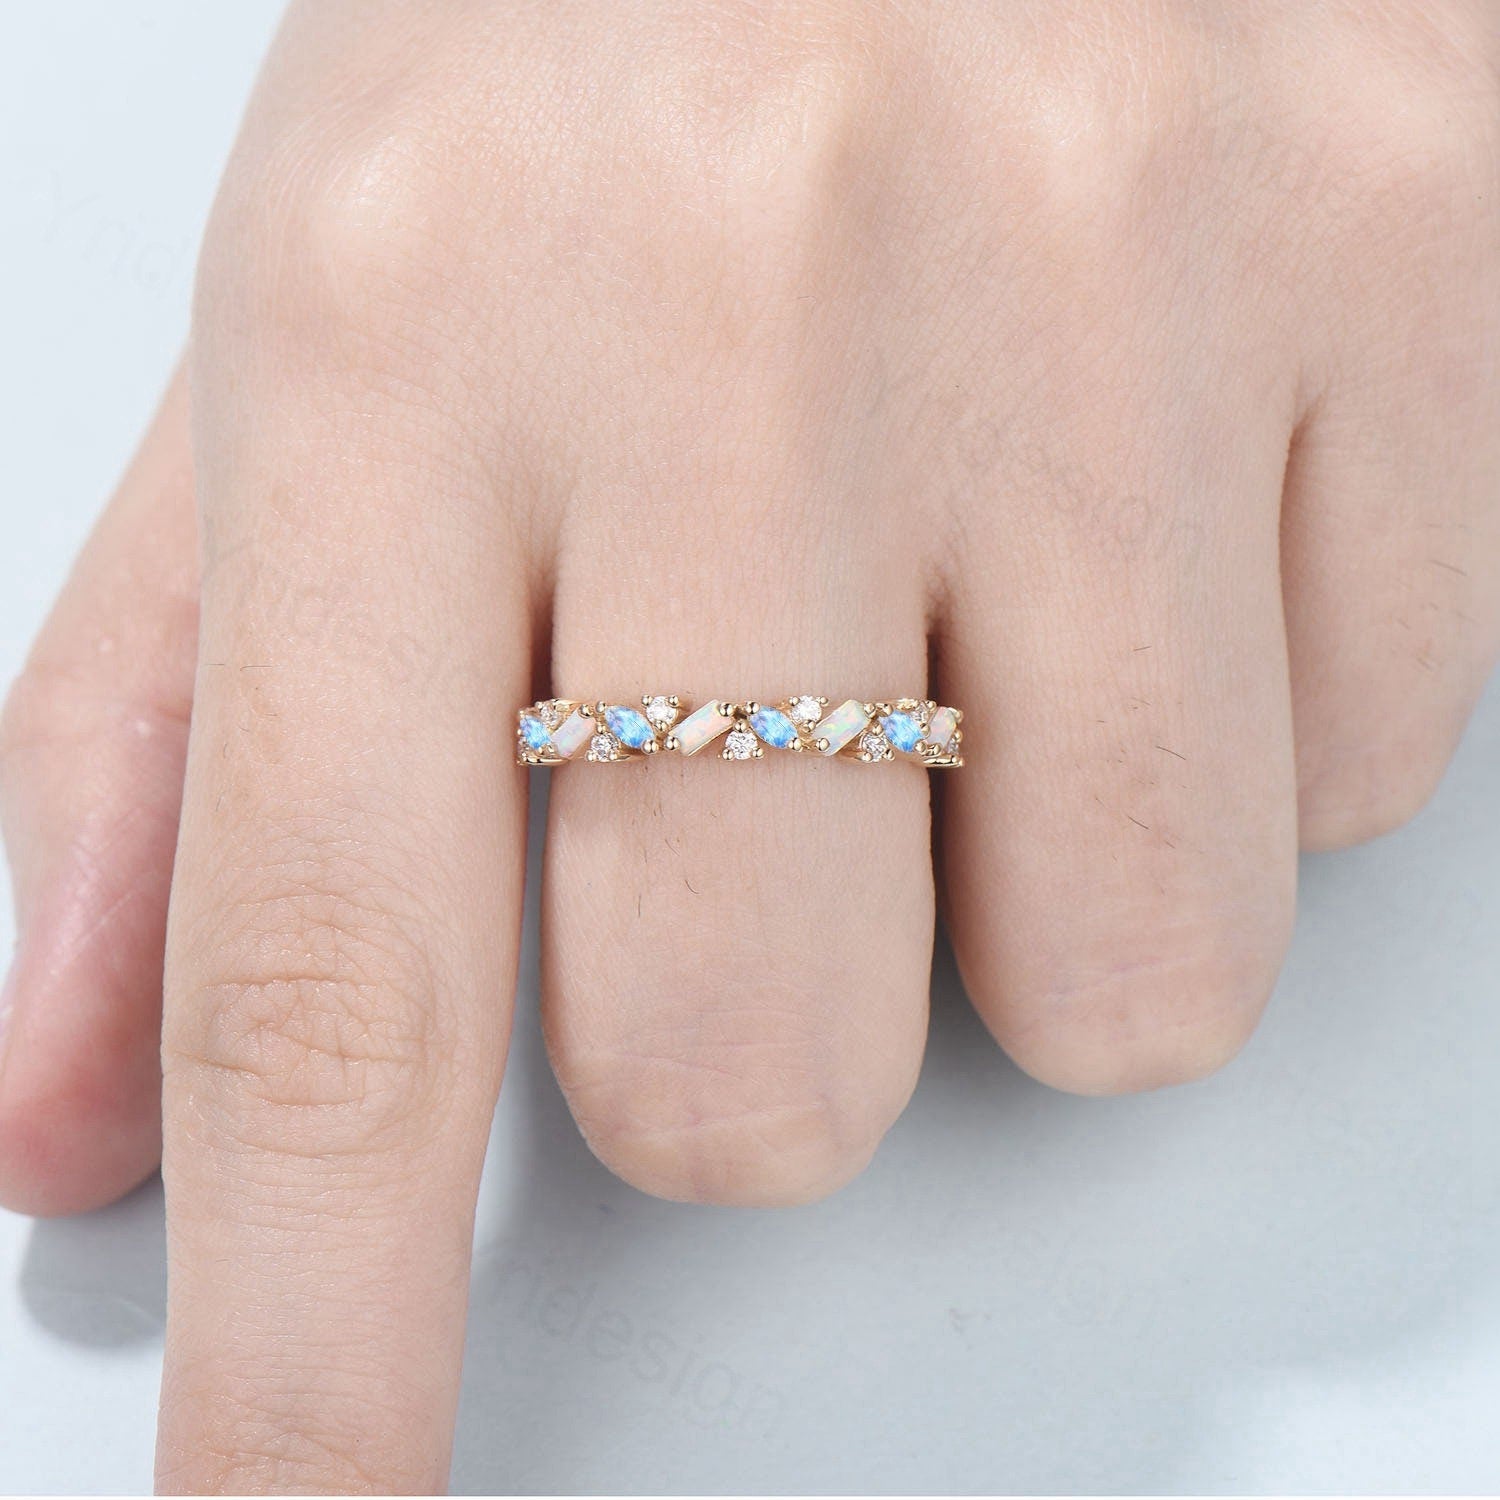 Vintage Opal Moonstone Eternity Wedding Band Women Unique Baguette  White Opal Stackable Ring Art Deco Matching Band Anniversary Gift - PENFINE